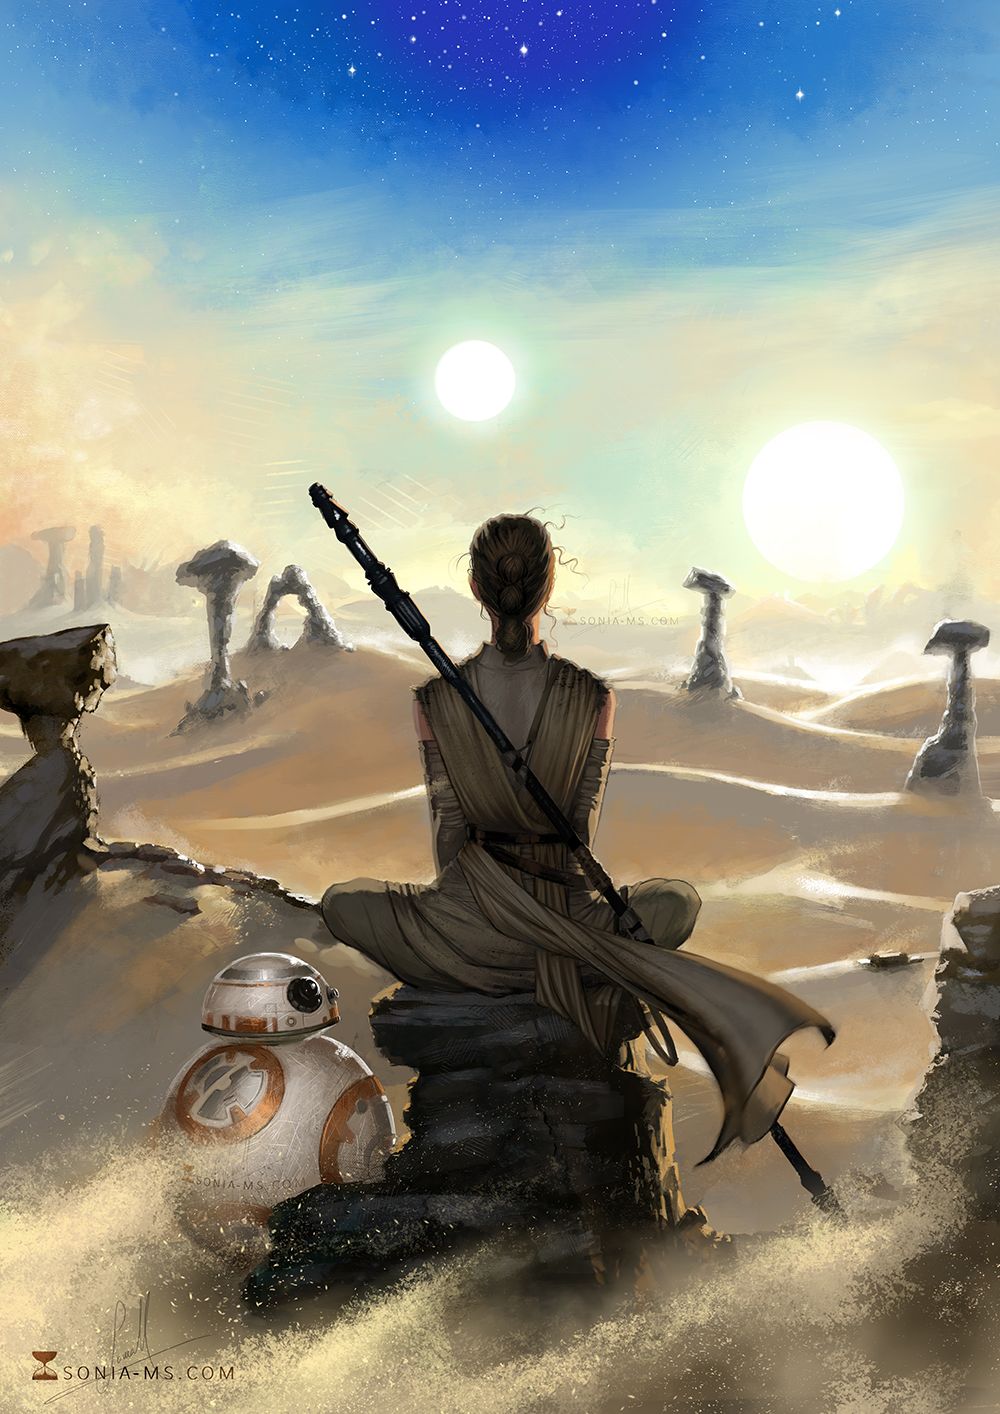 Free Download Star Wars Rey And Bb 8 By Soniamatas 1000x1414 For